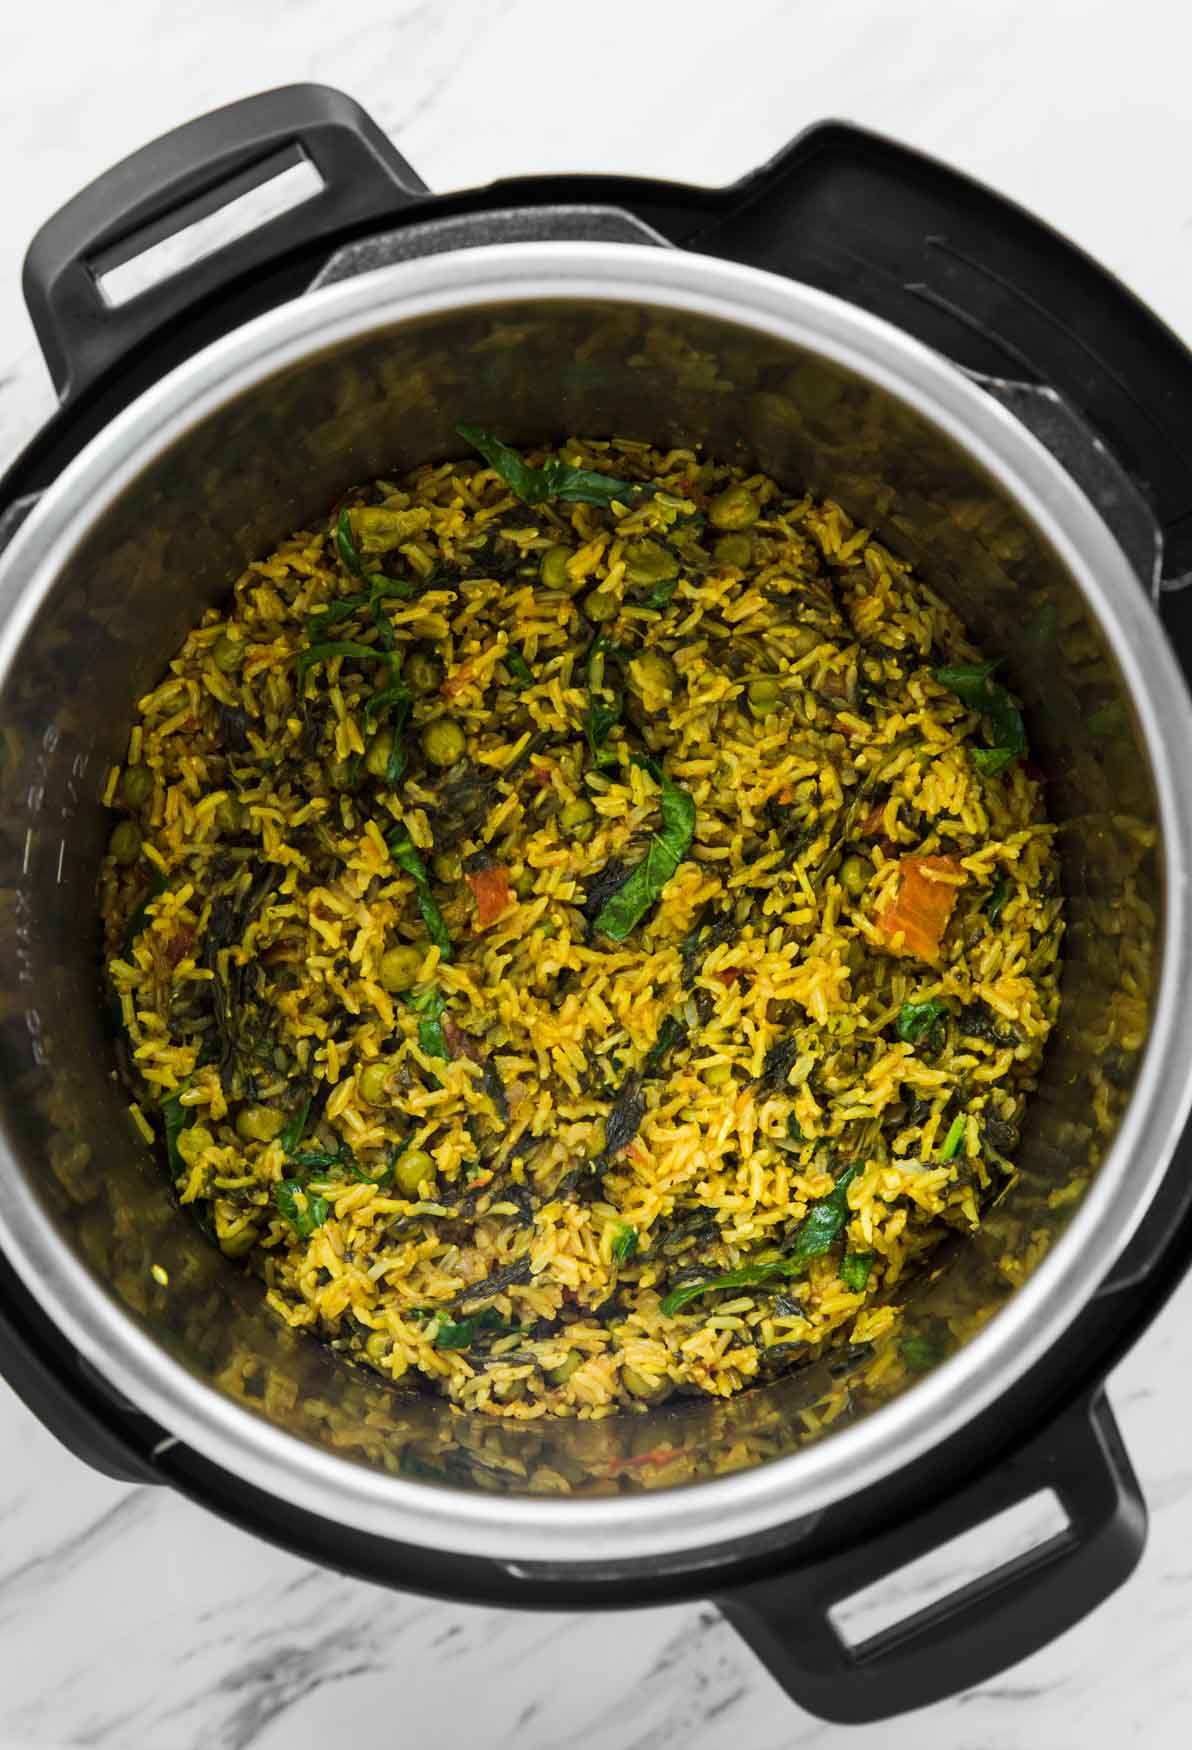 Instant Pot spinach brown rice after cooking